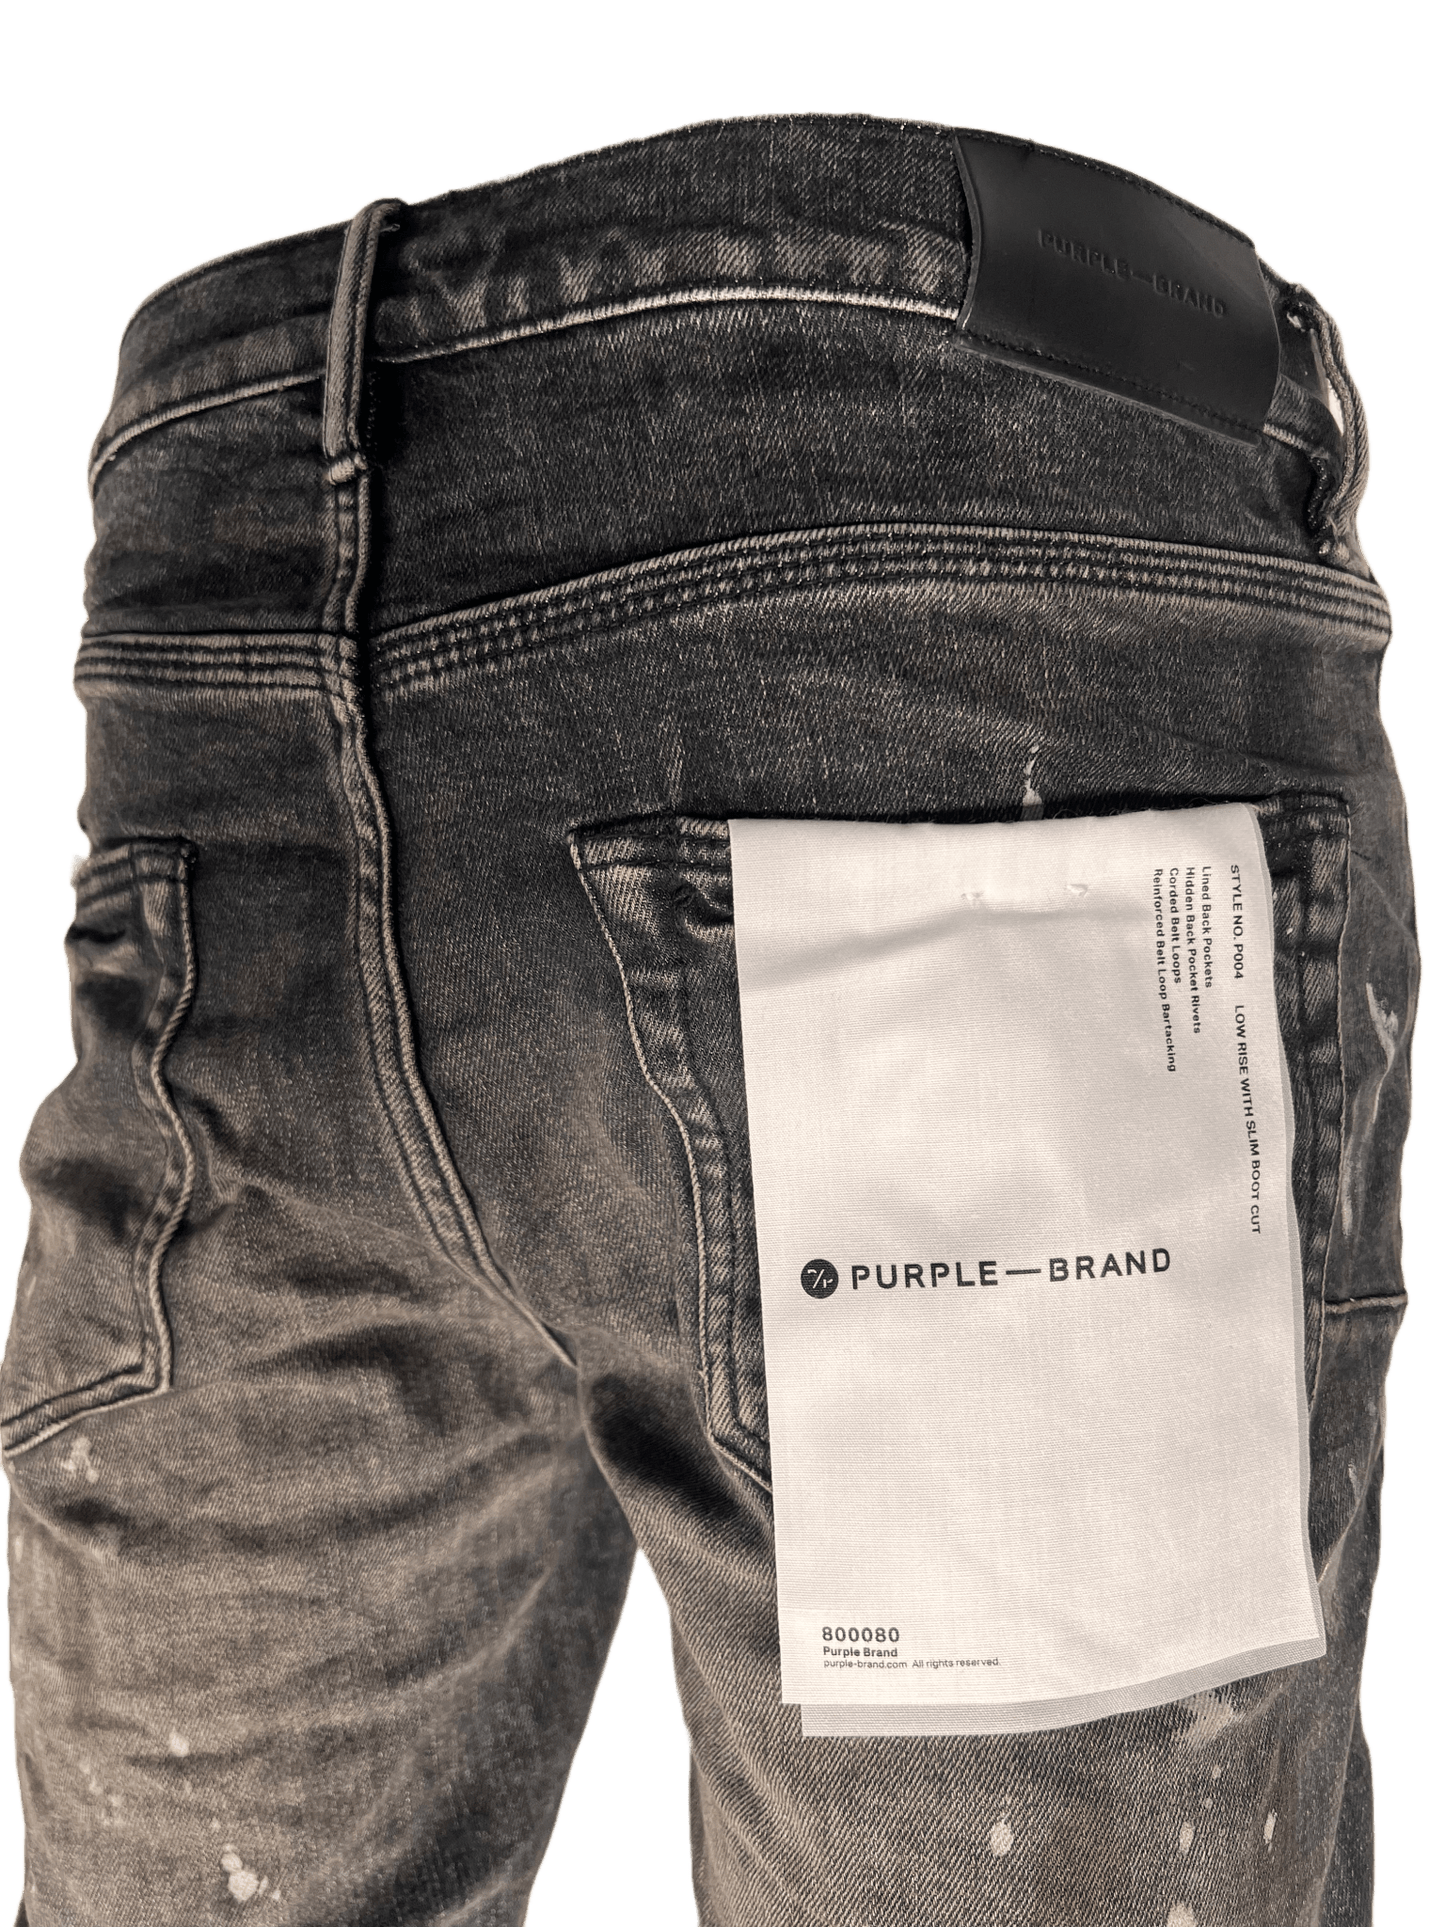 A pair of PURPLE BRAND boot cut denim jeans with a paper in the pocket.